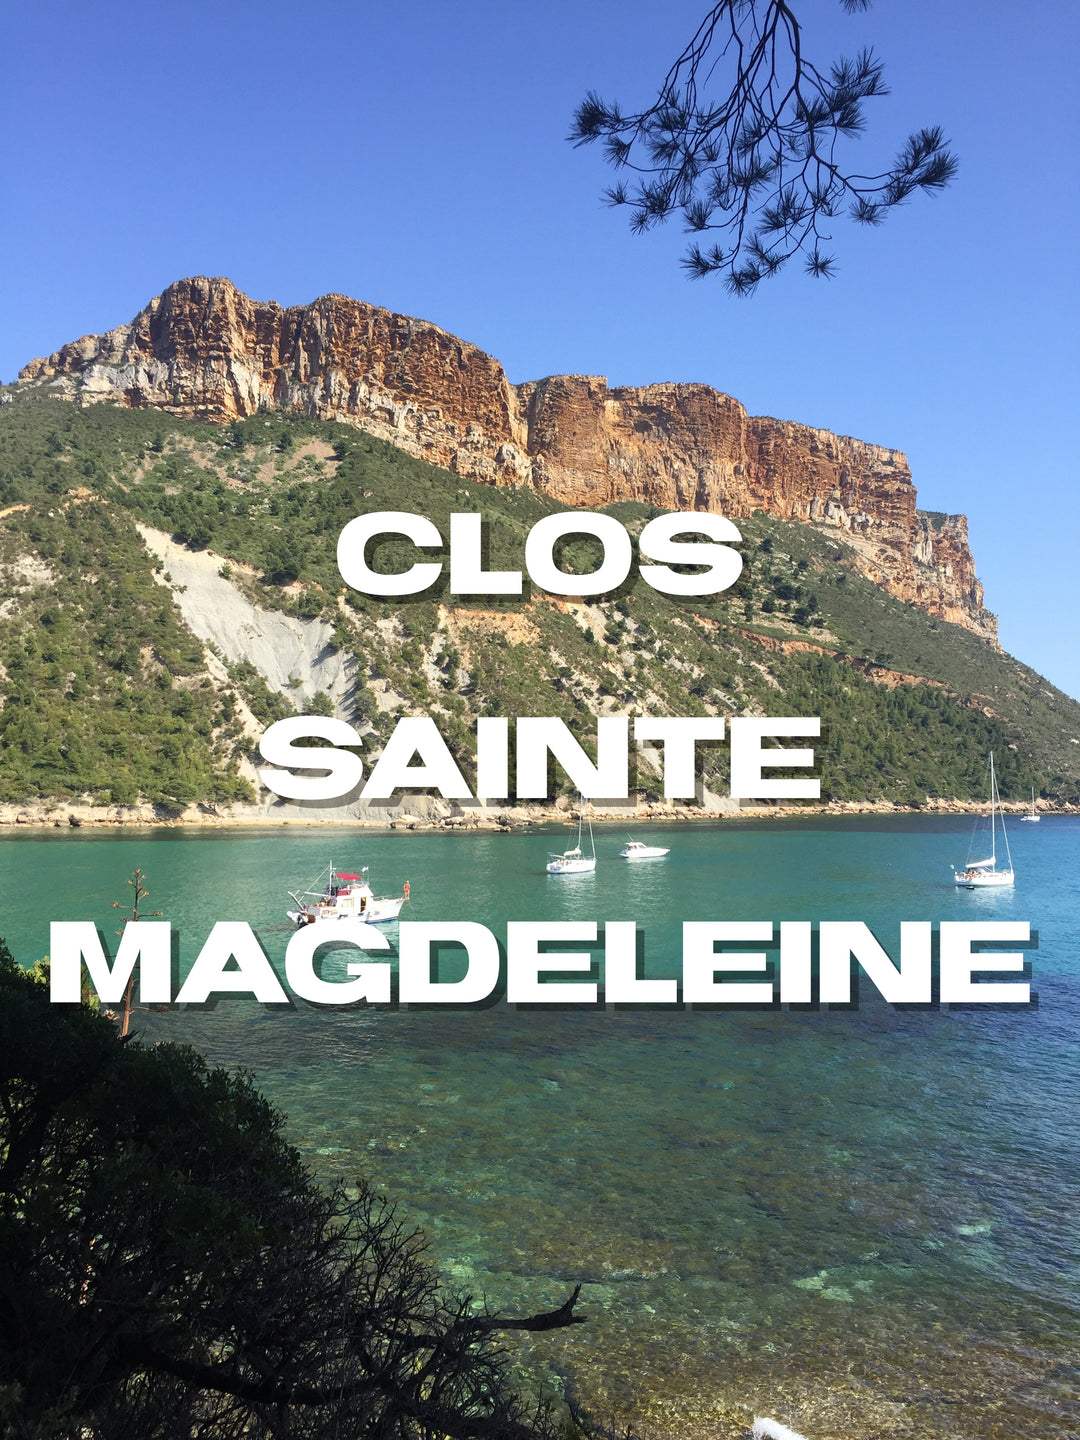 Has Summer Even Started Without a Bottle From Clos Sainte Magdeleine?